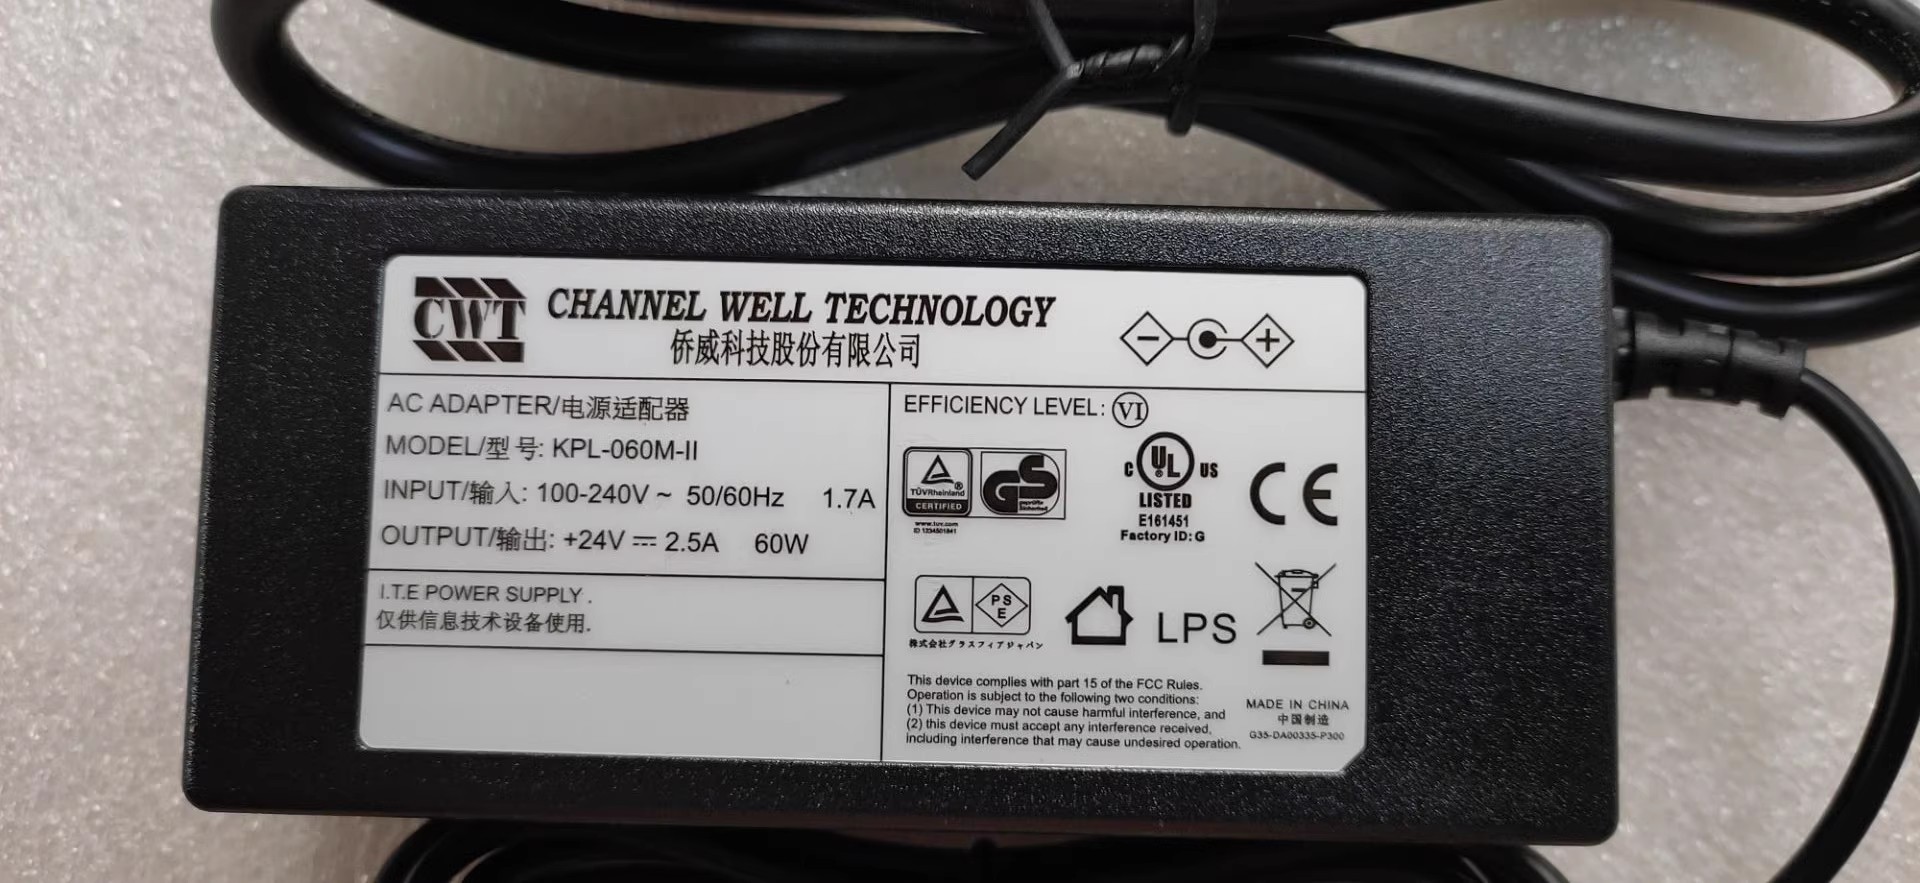 *Brand NEW* CWT KPL-060M-II 24V 2.5A 60W AC DC ADAPTHE POWER Supply - Click Image to Close